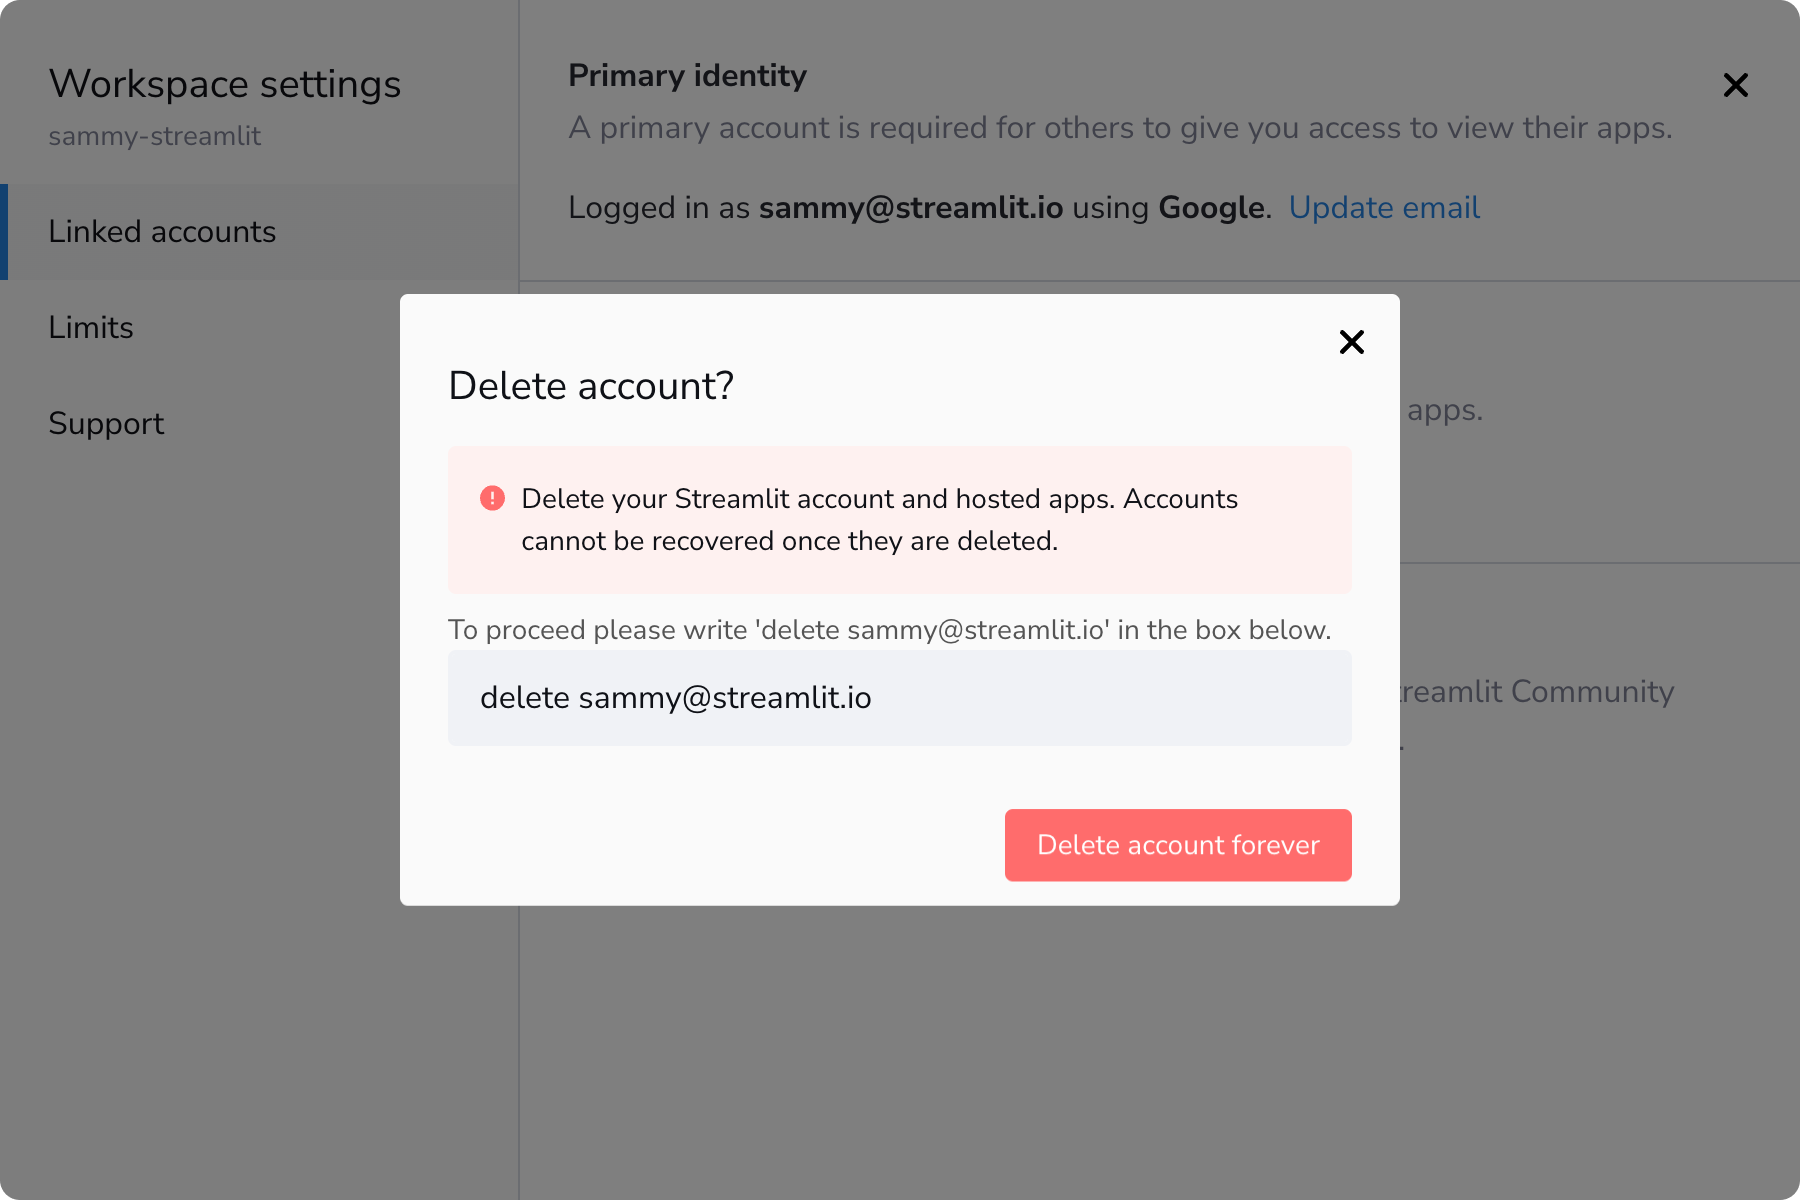 Confirm your account deletion by typing the specified string